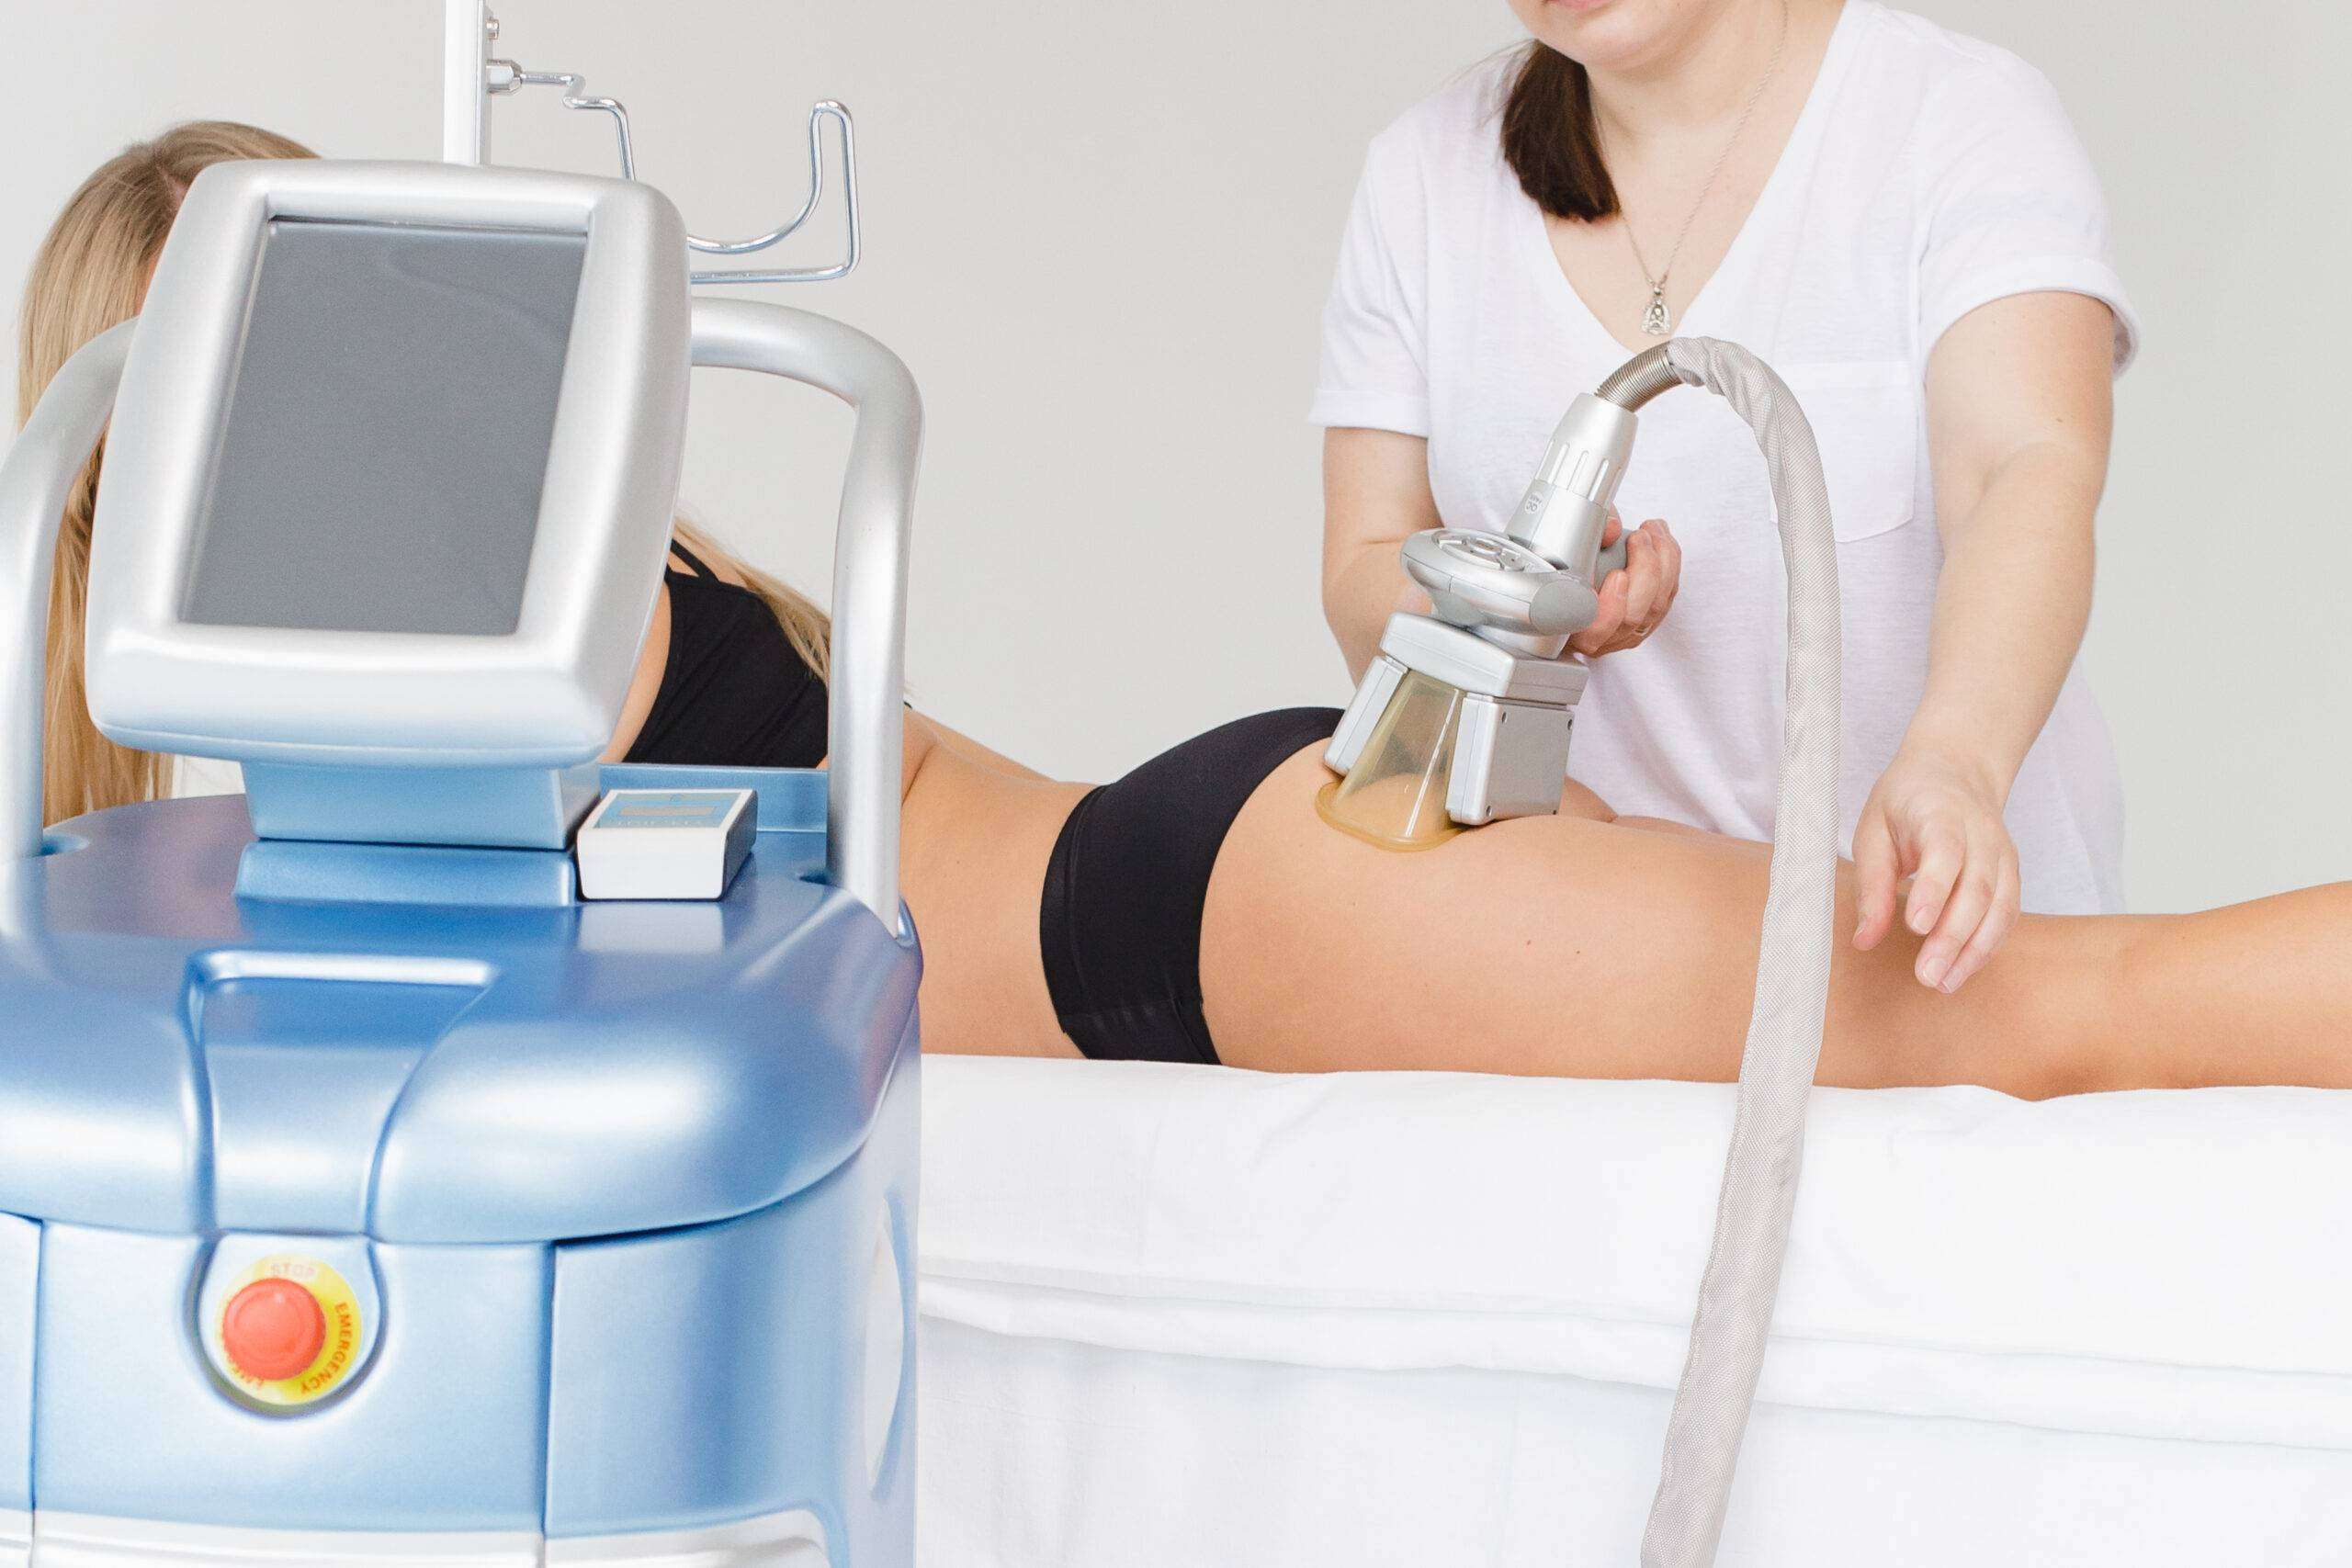 Complications of cryolipolysis device